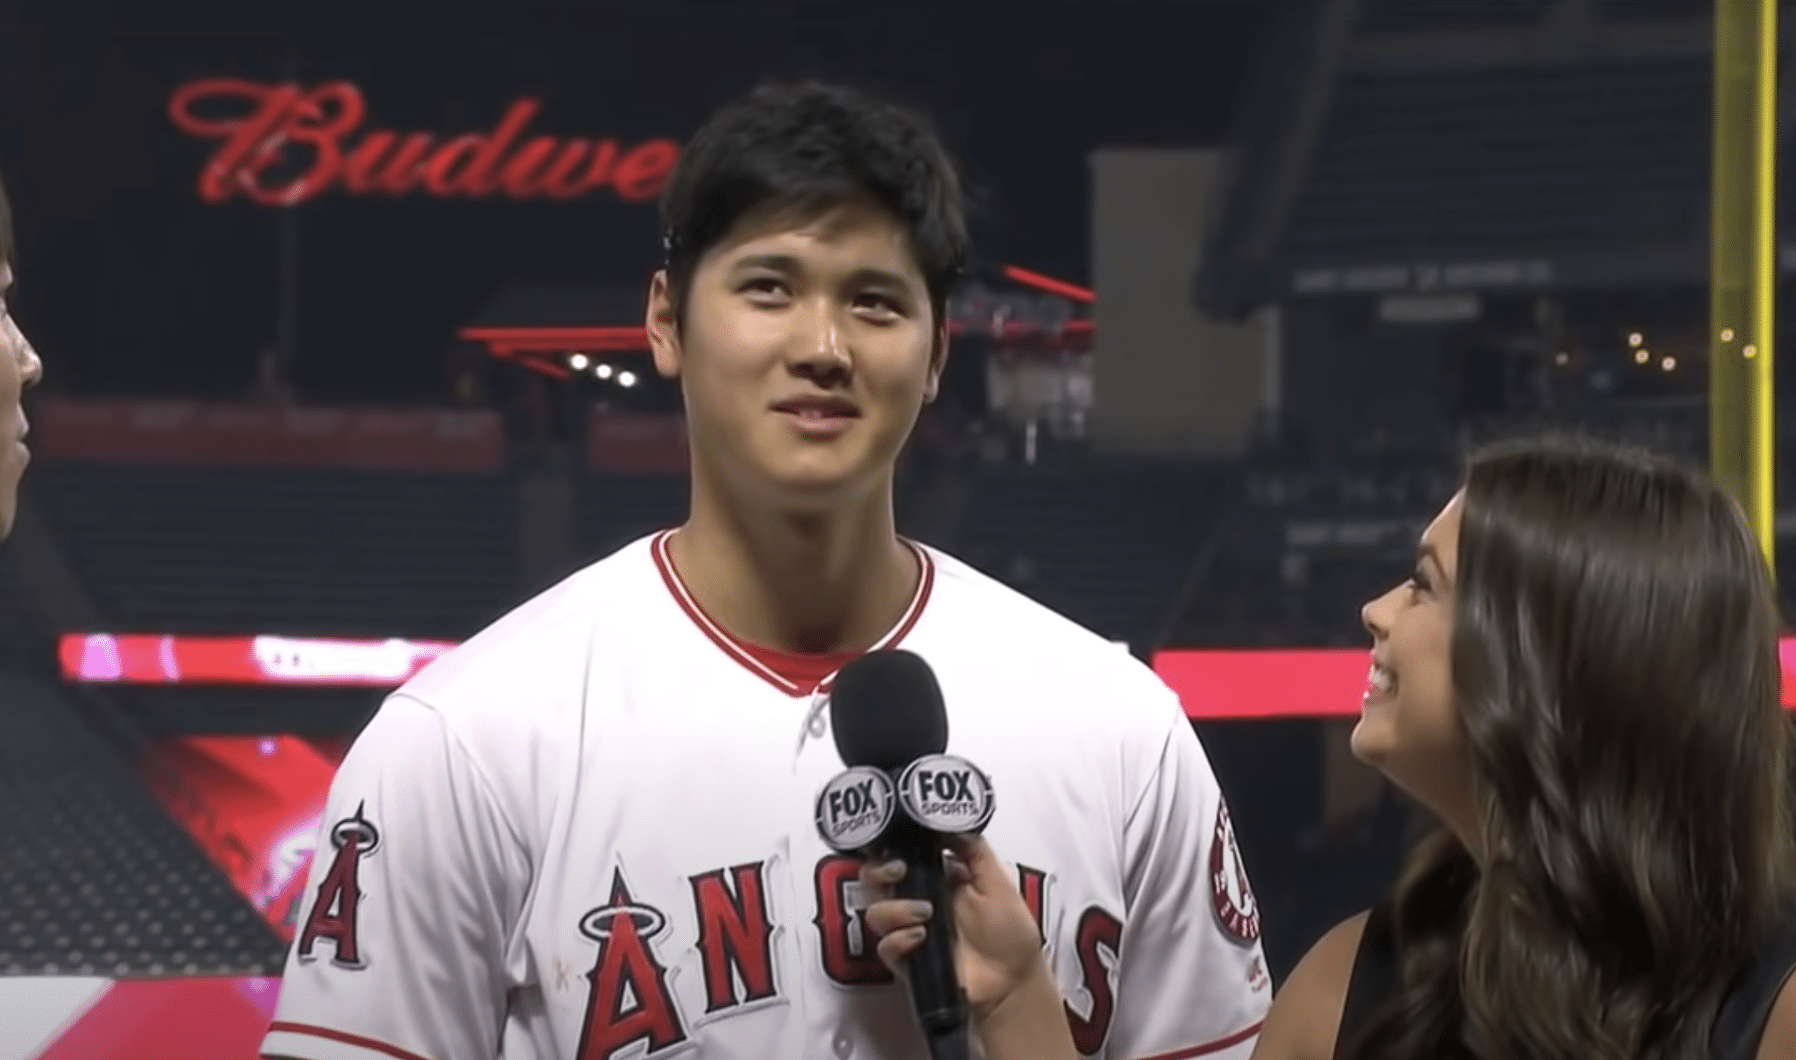 BREAKING: Shohei Ohtani agrees to largest contract in North American history! Report: Shohei Ohtani could opt out of $700 million deal with Dodgers